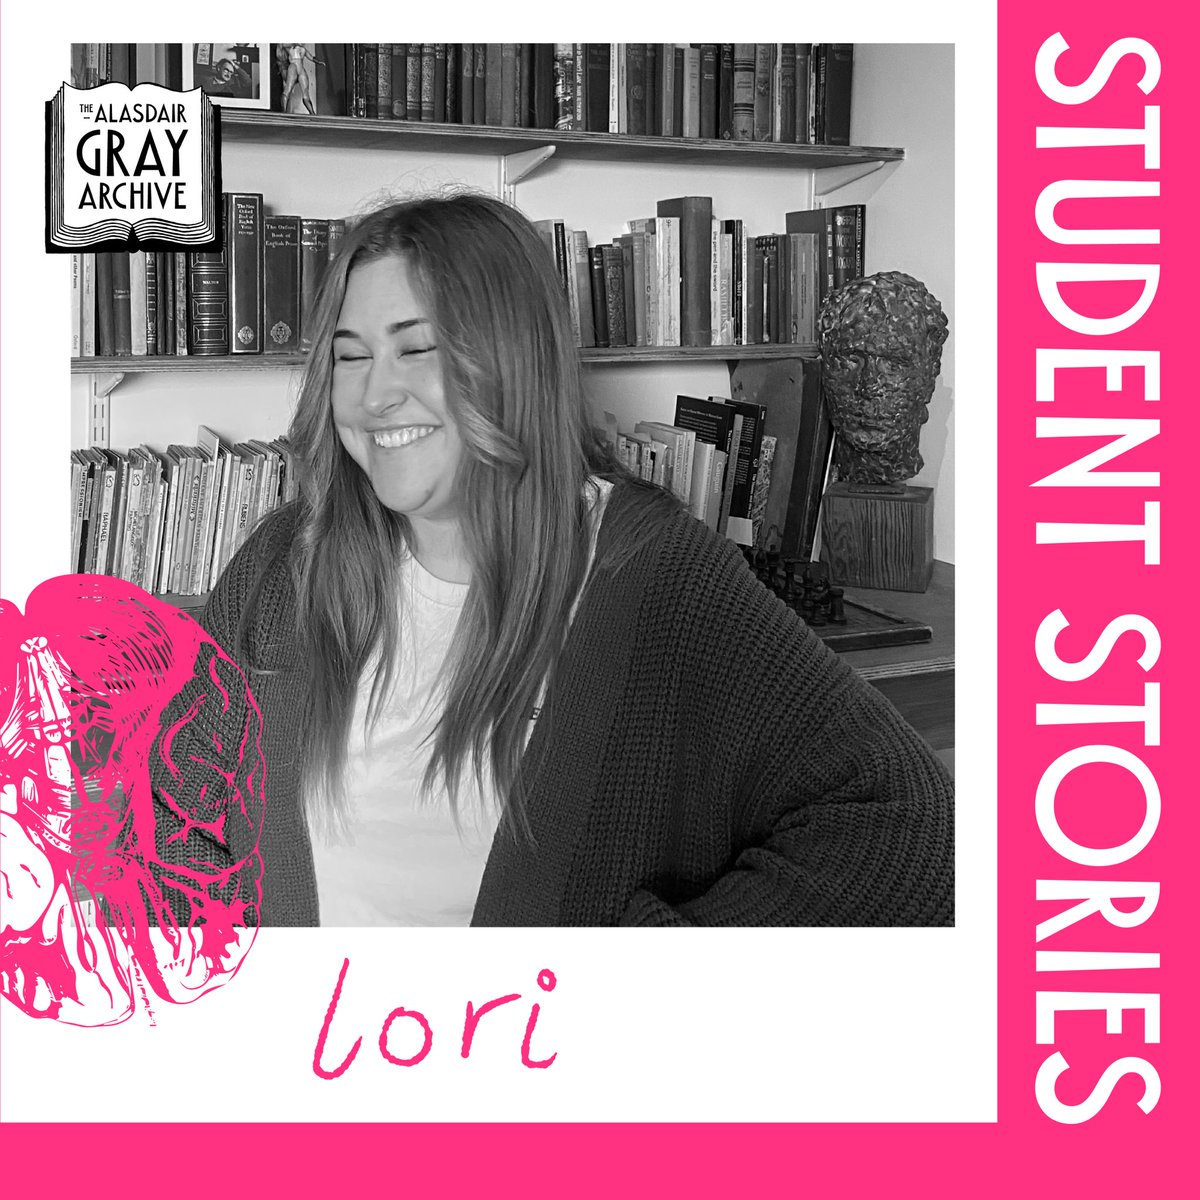 Meet another of our lovely placement student! Lori Baird is studying on the Masters in Curatorial Practice @GLAcuratorial. She is helping to catalogue the library as well as working on a creative response, drawing from her background in jewellery design and silversmithing 👍